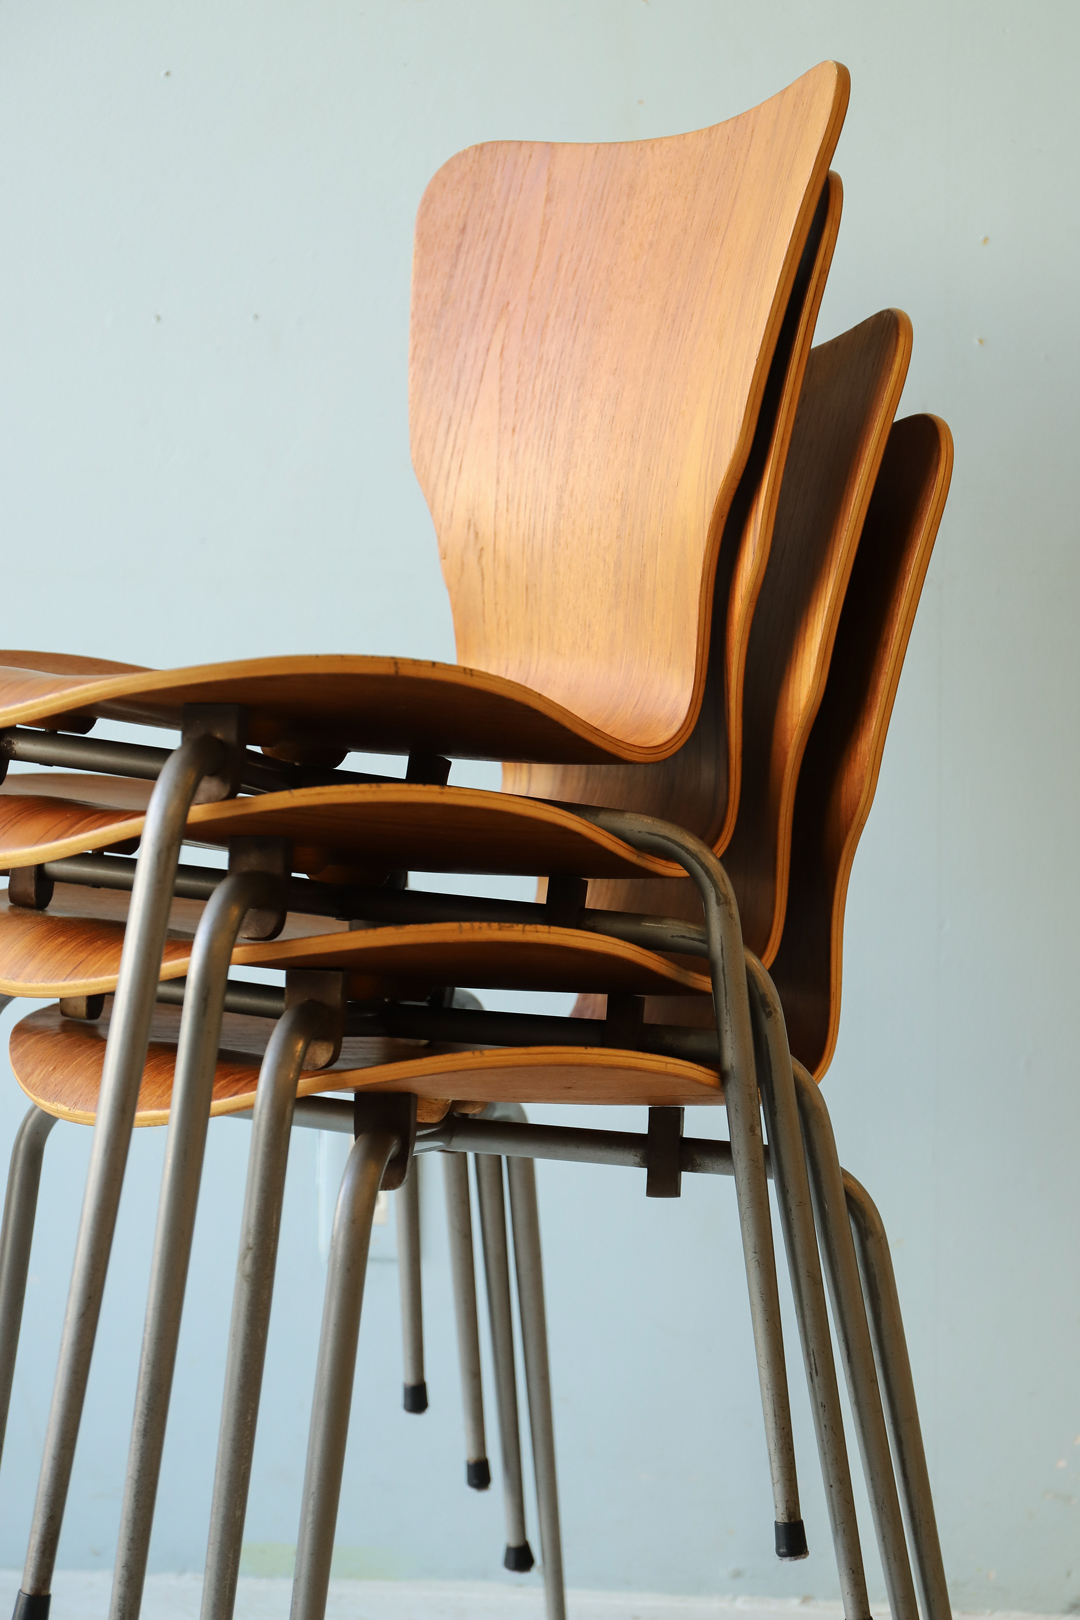 Danish Vintage Teak Plywood Stacking Chair MH Stålmøbler/デンマークヴィンテージ スタッキングチェア チーク材 プライウッド 椅子 ミッドセンチュリー モダン 北欧家具